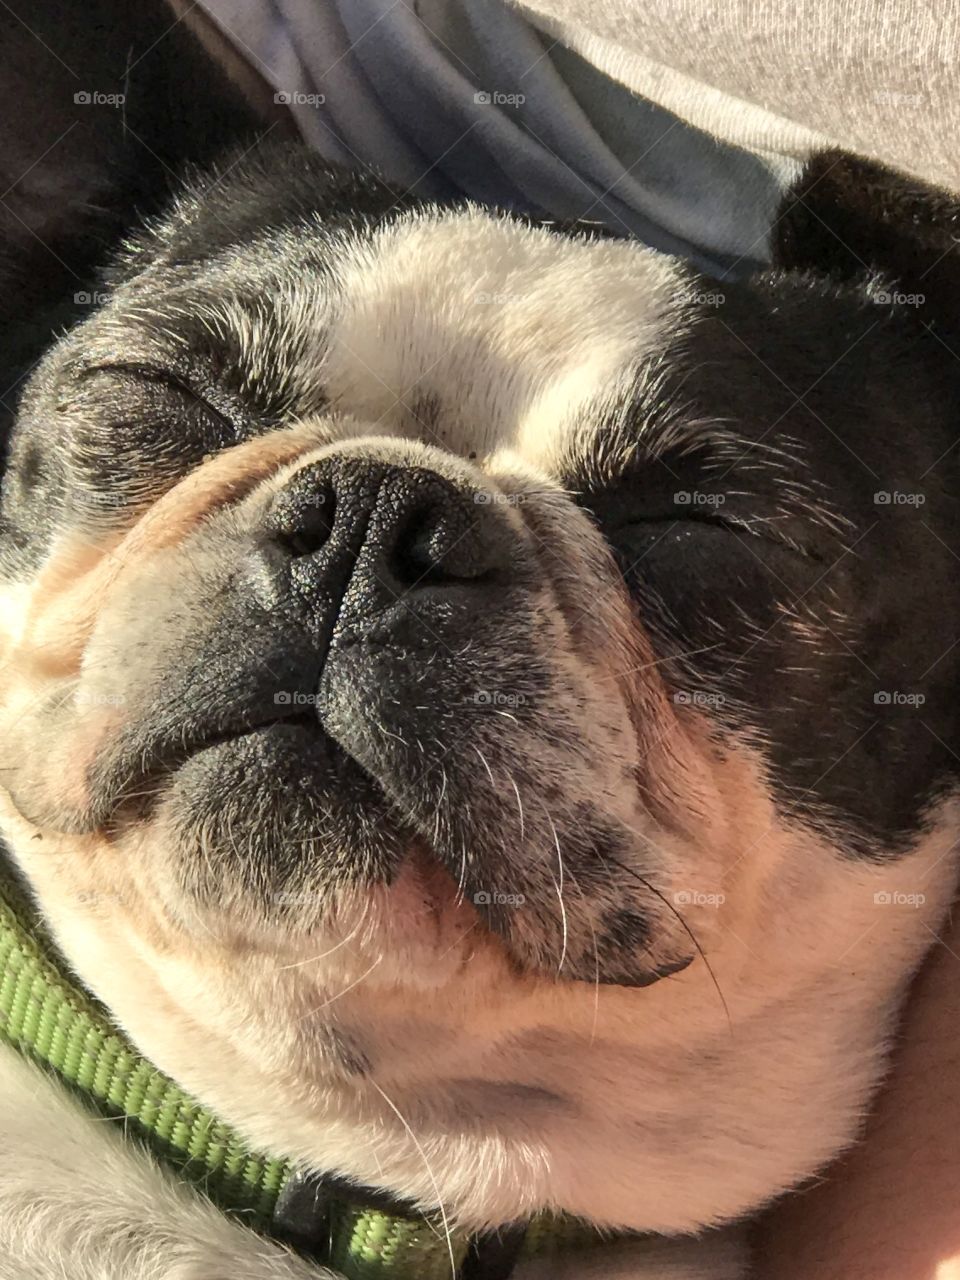 Portait of my Boston Terrier sleeping on her back on a warm  evening as the sun was setting in the sky. The sunlight was warm & golden & the smile of contentment was widened by the snuggle from my daughter while she scratched the pup’s belly! Bliss!